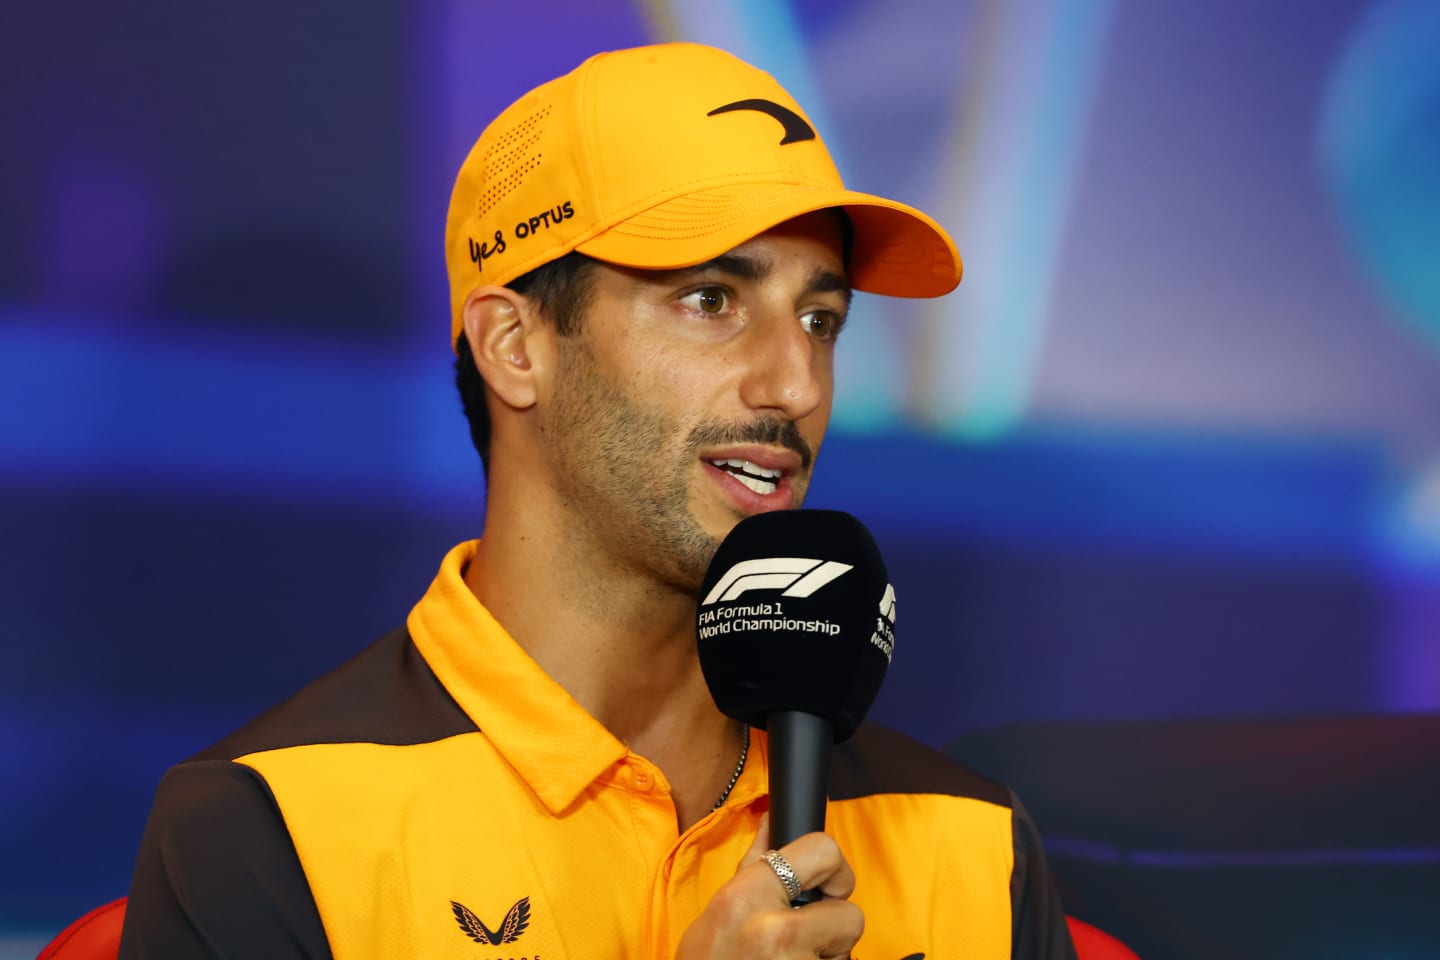 ABU DHABI, UNITED ARAB EMIRATES - NOVEMBER 17: Daniel Ricciardo of Australia and McLaren talks in a press conference during previews ahead of the F1 Grand Prix of Abu Dhabi at Yas Marina Circuit on November 17, 2022 in Abu Dhabi, United Arab Emirates. (Photo by Bryn Lennon/Getty Images)